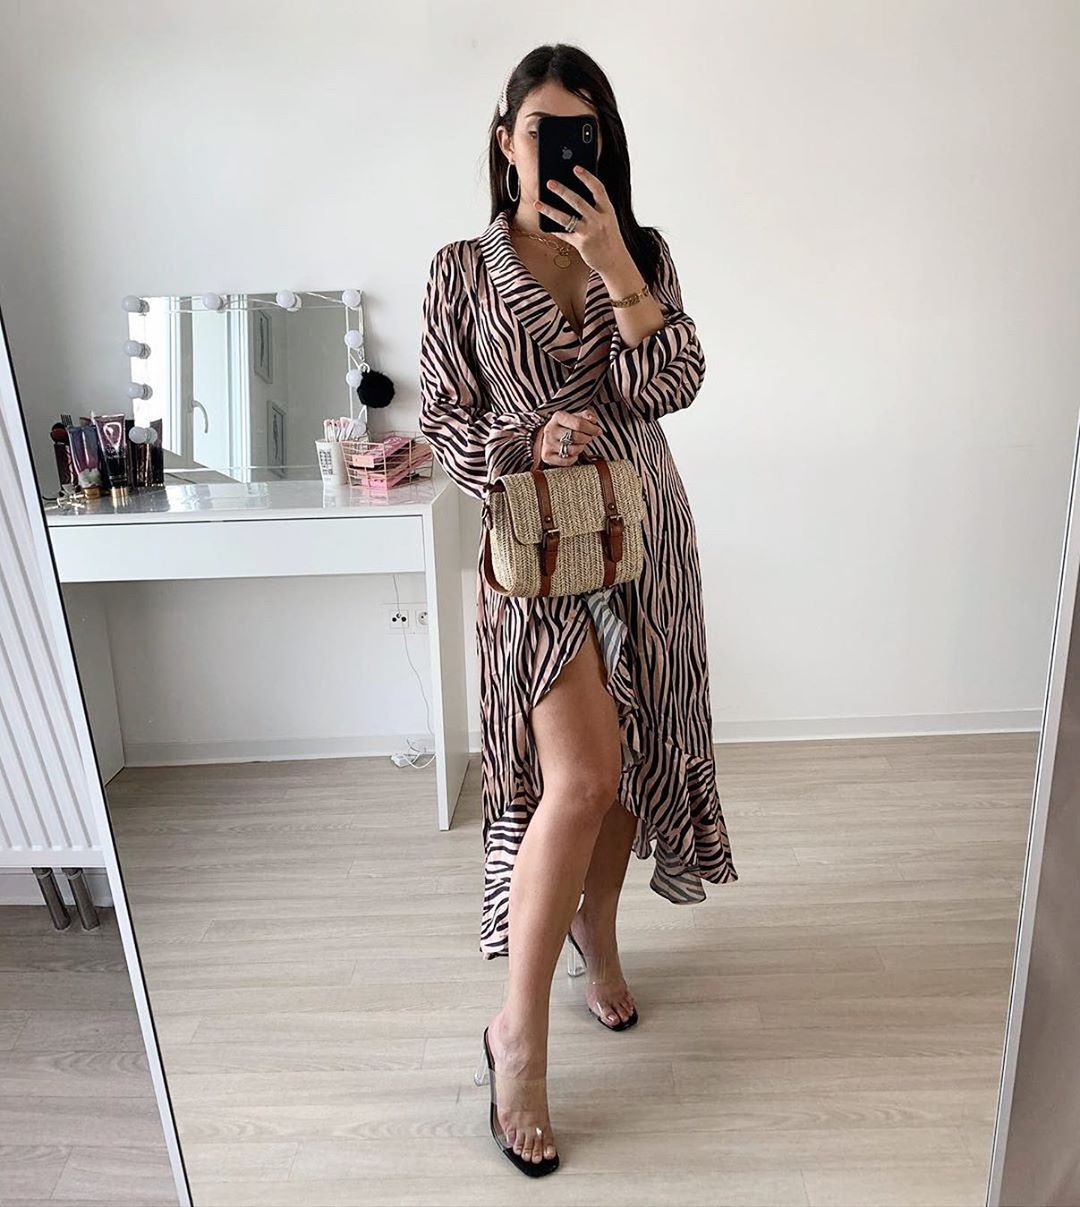 SHEIN.COM - We're obsessed with this look! 💕  @outfit_aya

Shop Item #: 1576689

#SHEINgals #SHEINstyle #StyleGoals